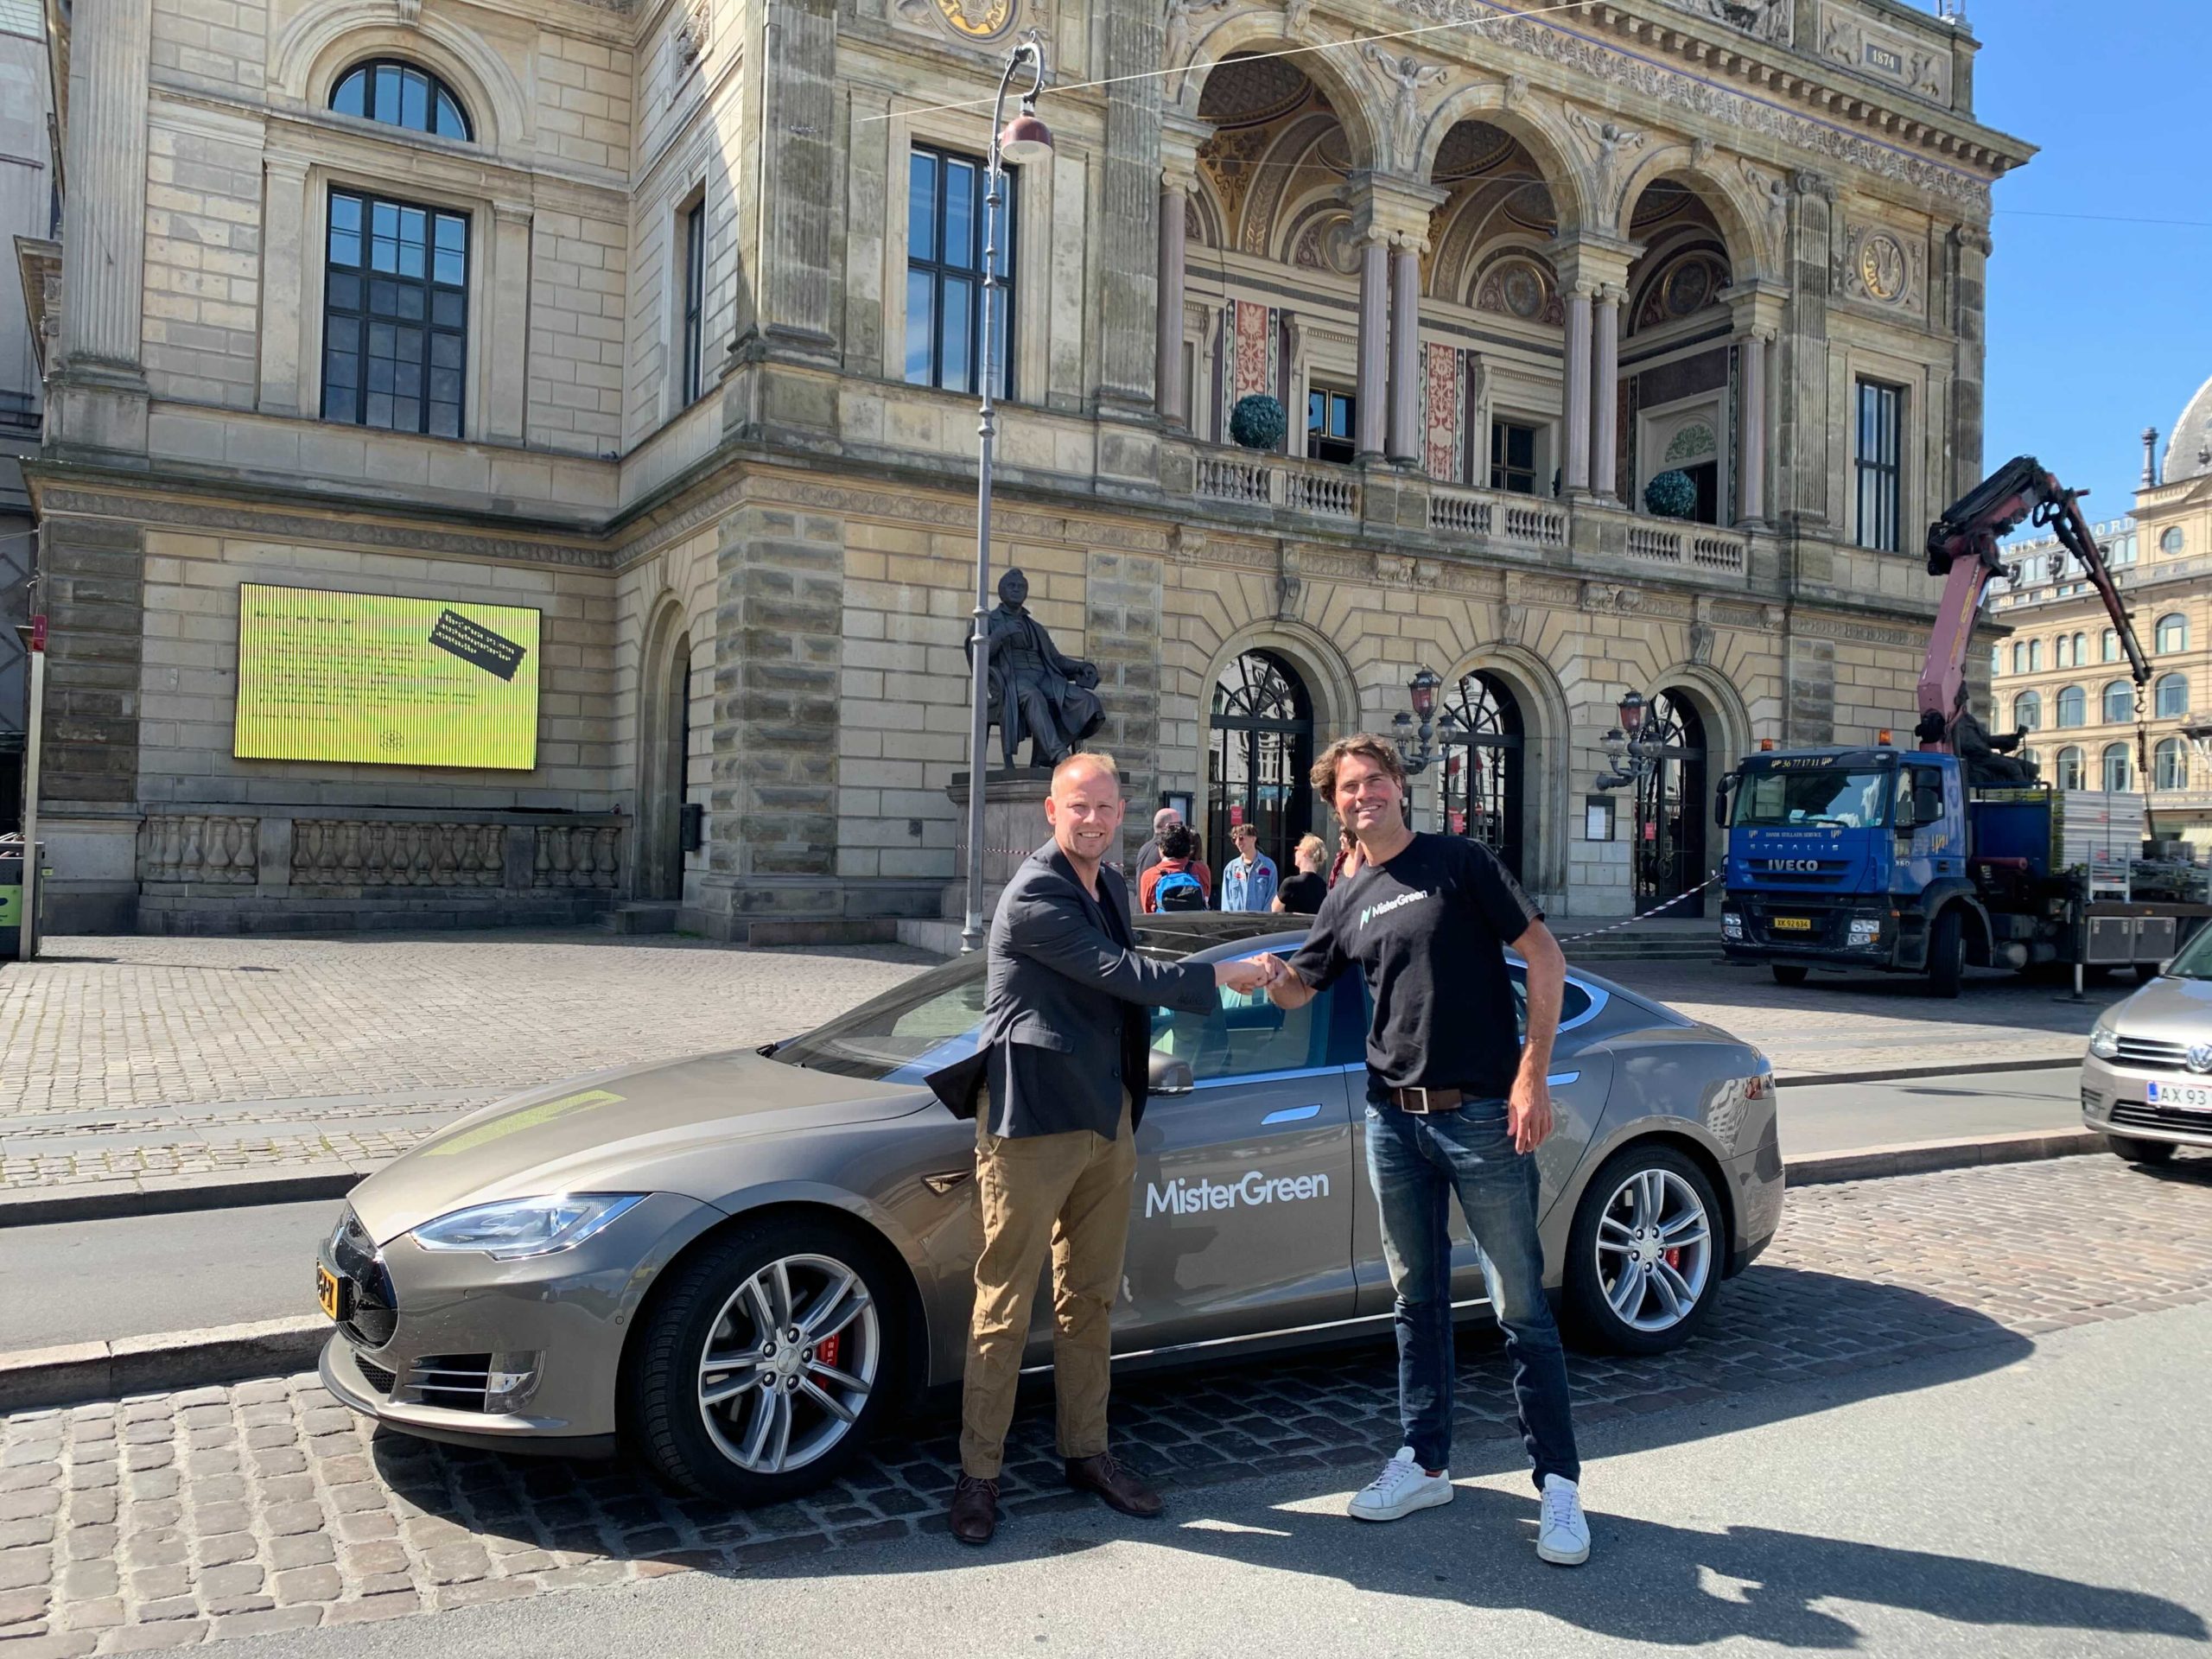 MisterGreen expands to Denmark with 300 Teslas